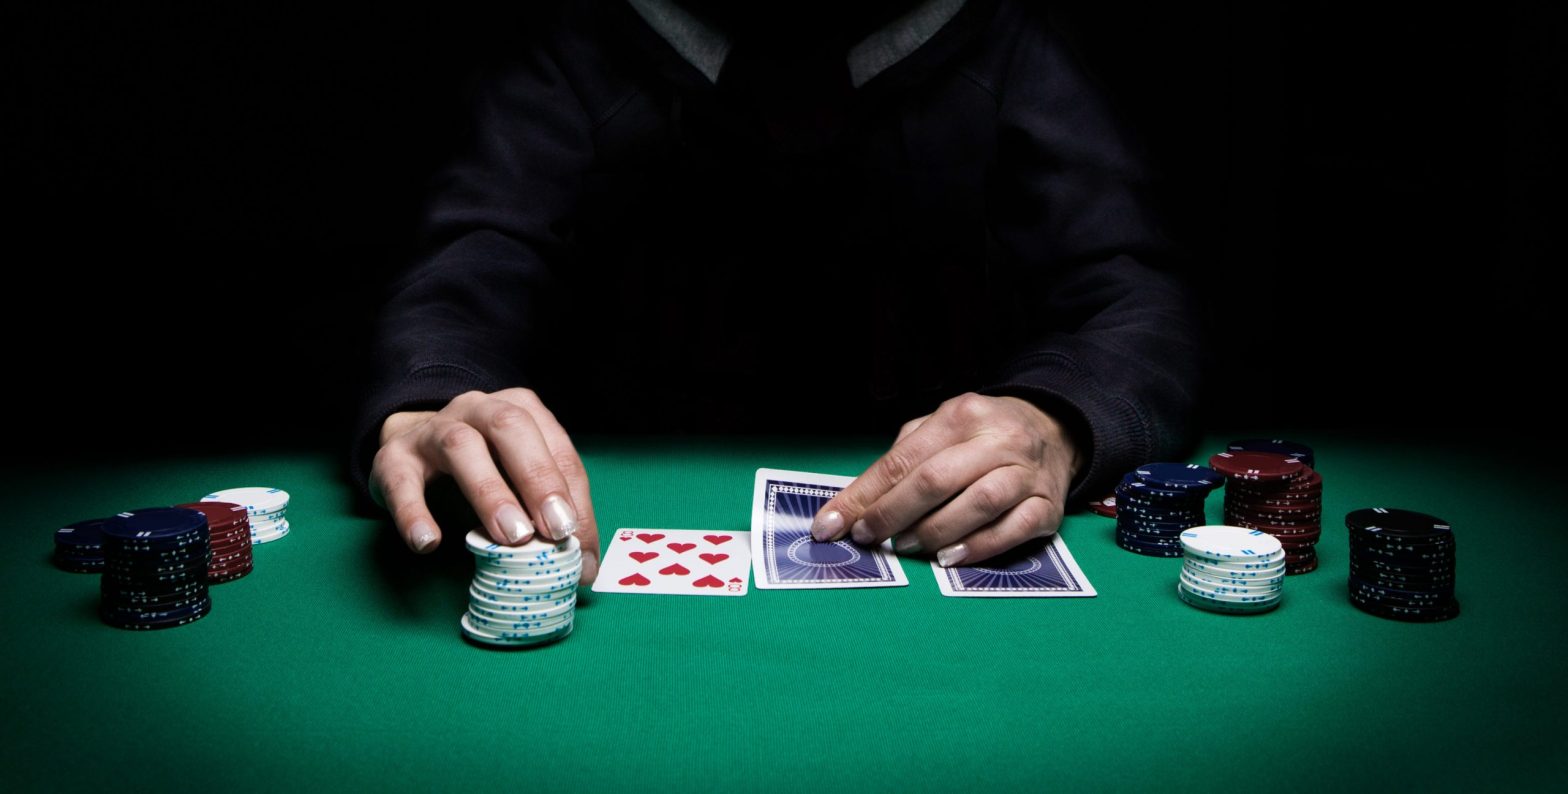 Strategy for beginners: choosing a starting hand in Omaha poker